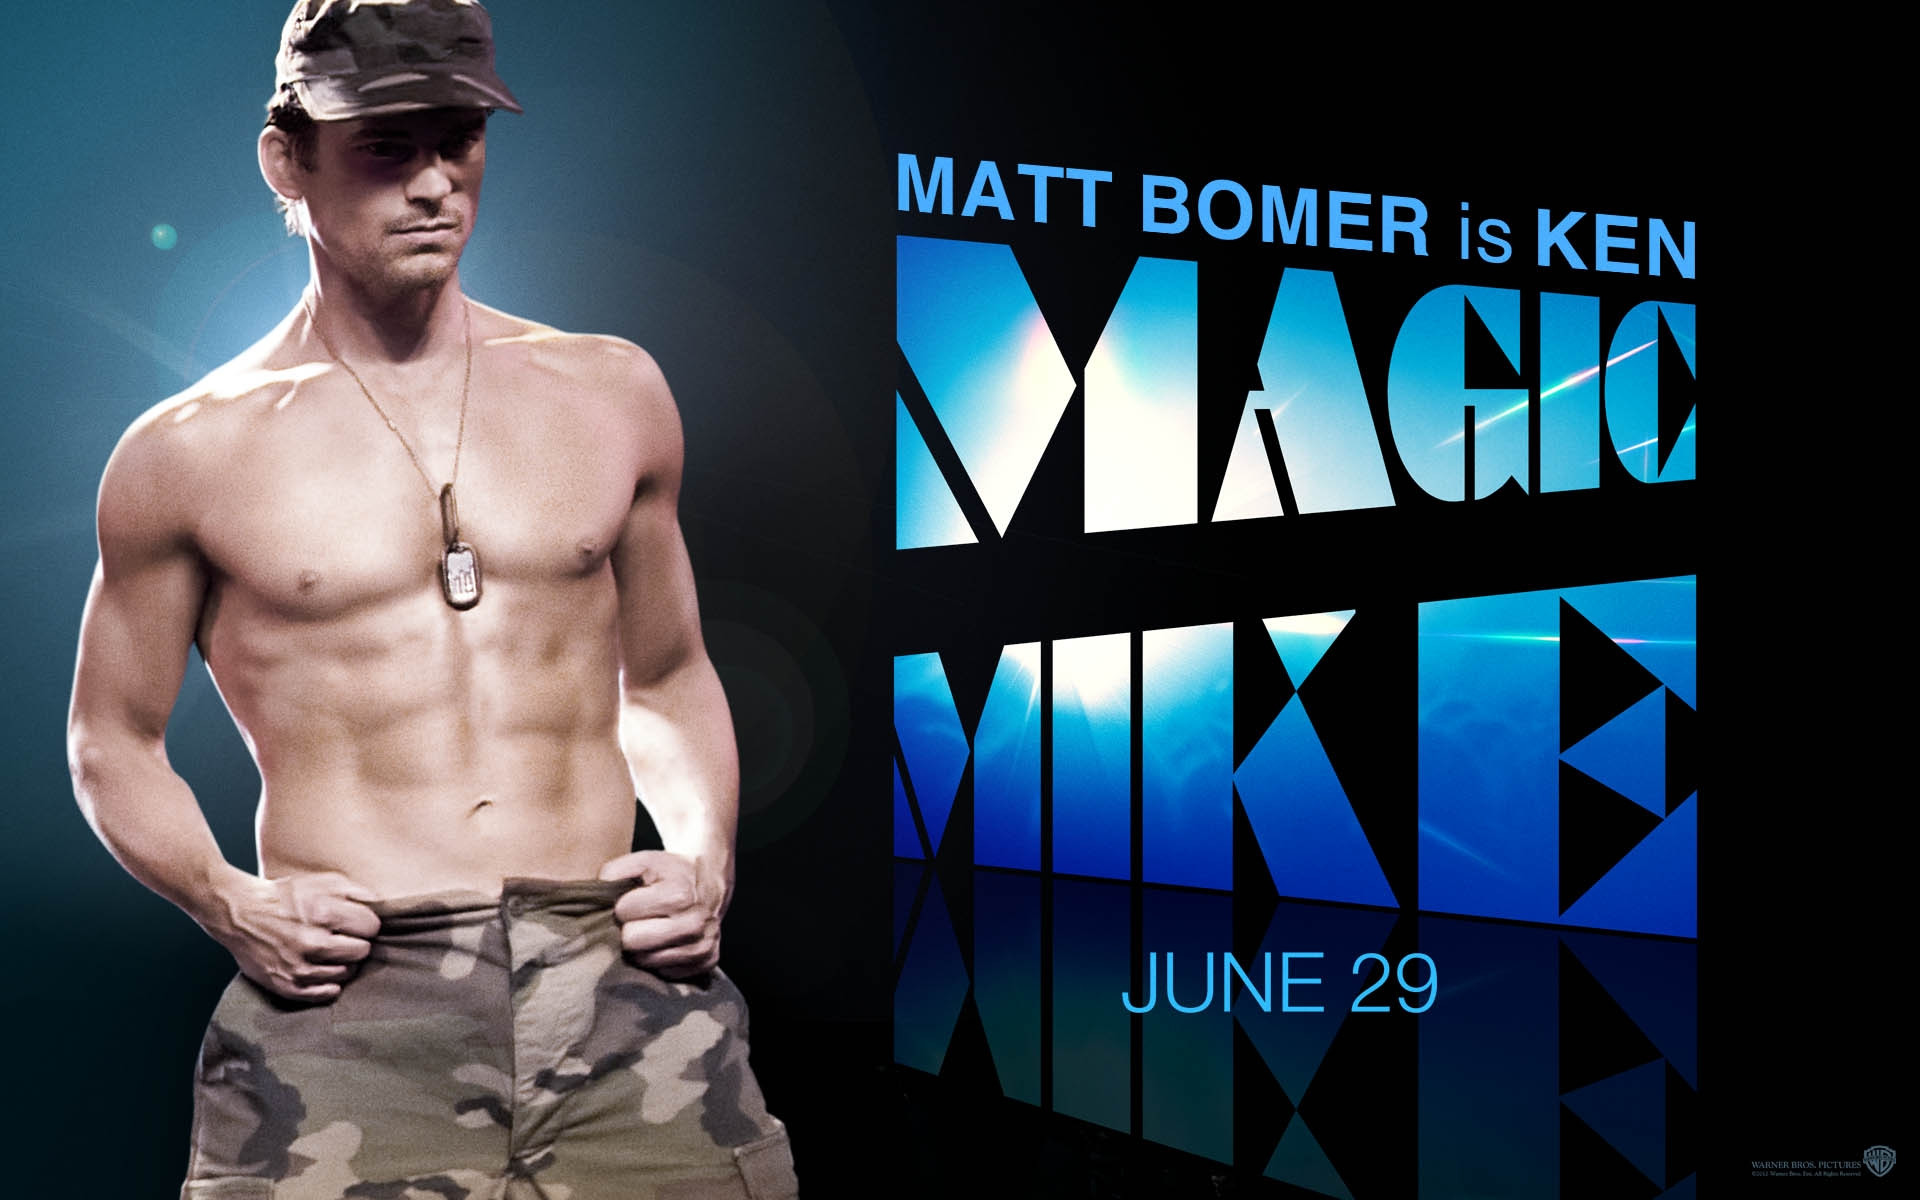 1920x1200 Magic Mike Movie Posters and Wallpapers - Free Magic Mike Movie Wallpapers  Desktop available in HD resolutions. Get now “Magic Mike Movie Posters and  ...